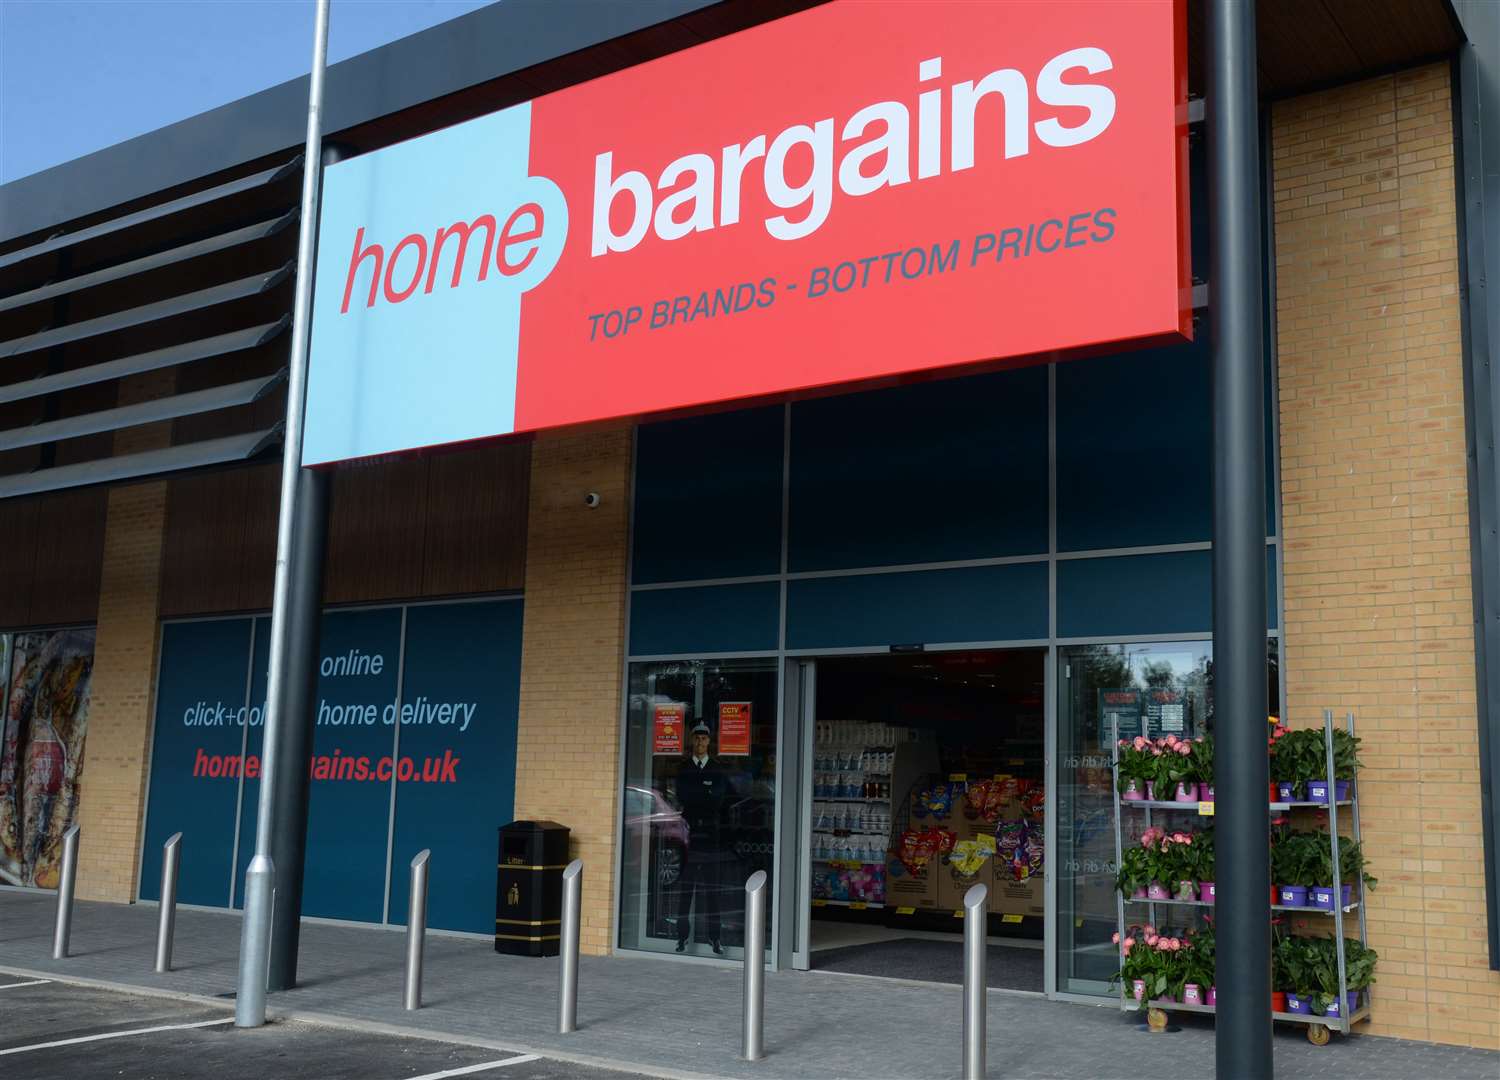 Discount retailer Home Bargains opened a store in Sittingbourne last year